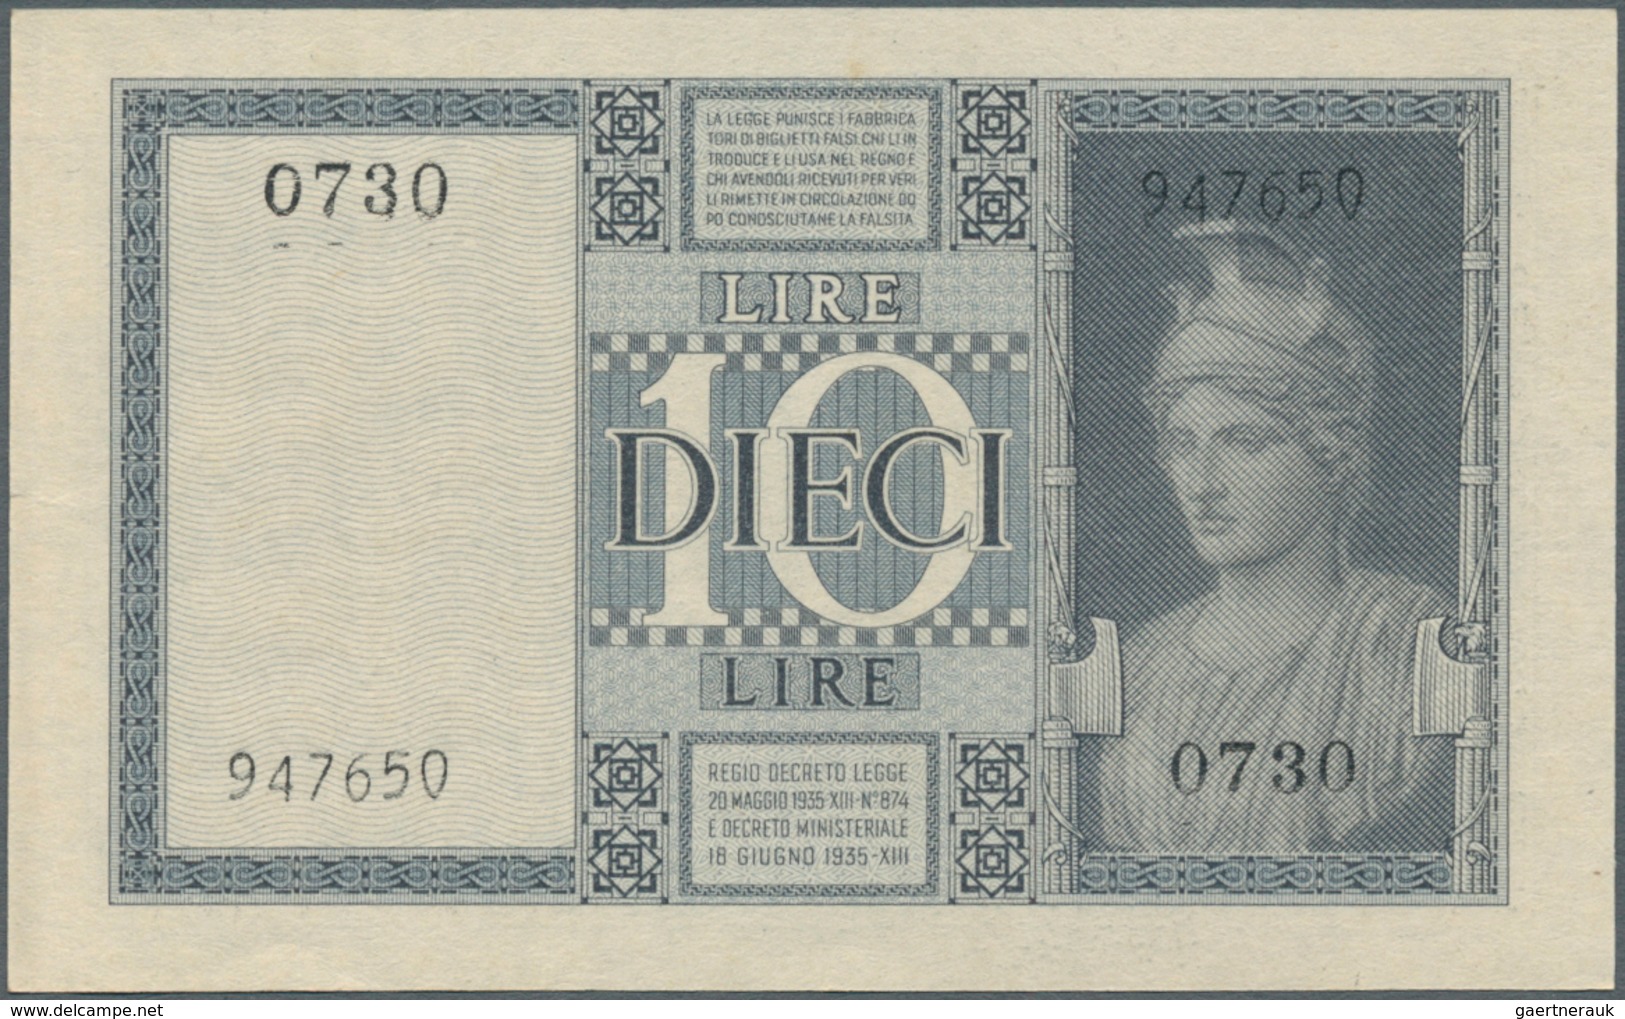 02934 Alle Welt: Small collection with 113 Banknotes from all over the world with some doublets, comprisin